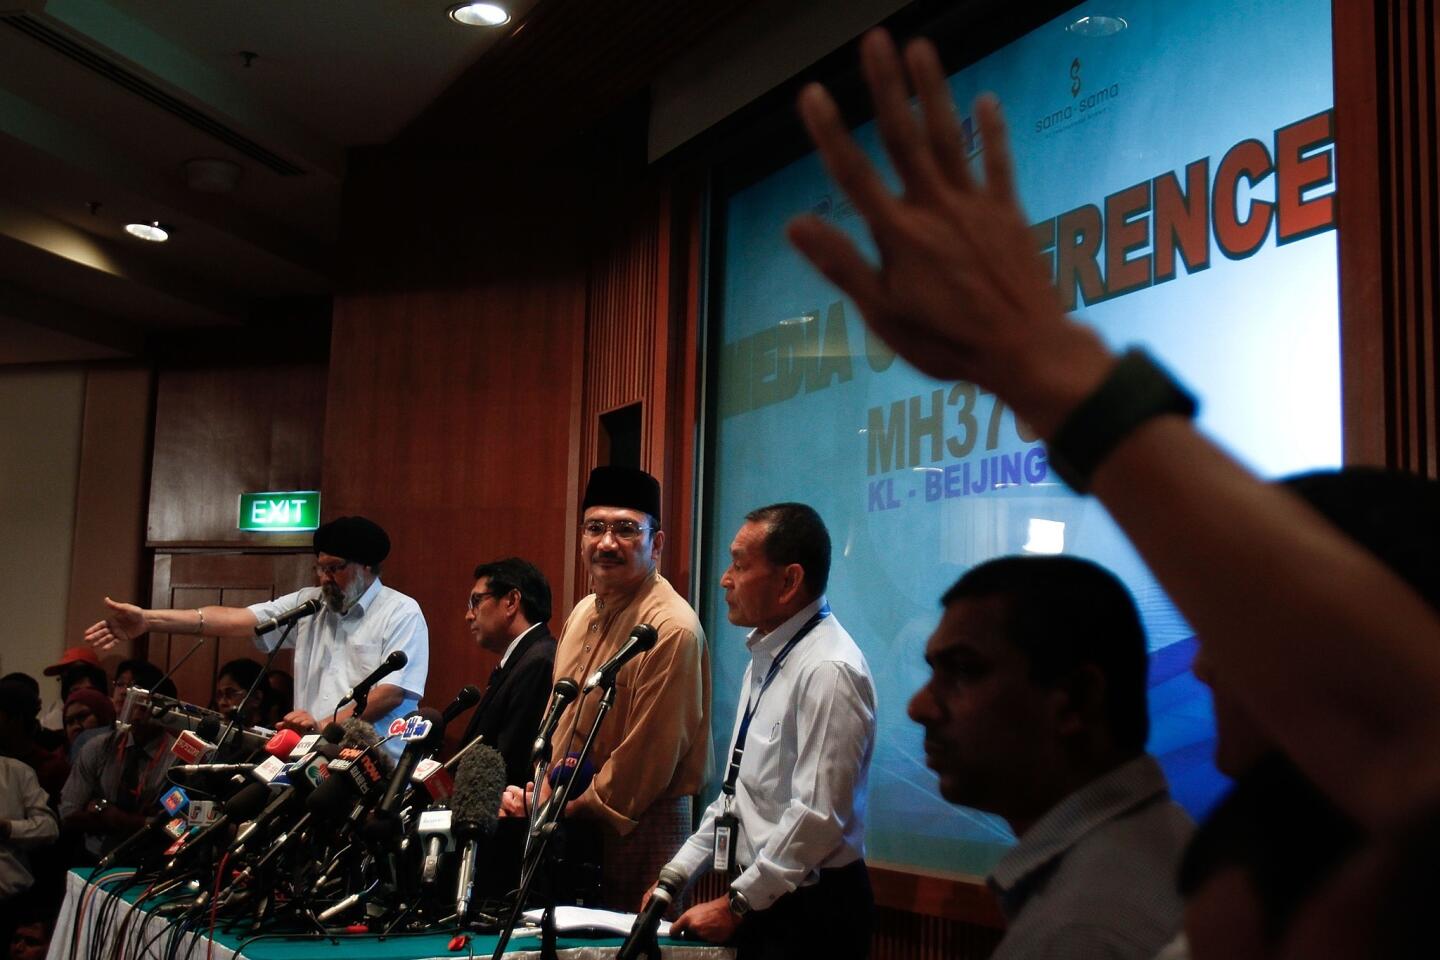 Minister of Transport Hishamuddin Hussein (C), Director General of the Department of Civil Aviation (DCA) Azharuddin Abdul Rahman (L) and MAS Group CEO Ahmad Jauhari Yahya (R) react to a question from the floor during a press conference as the search for missing Malaysian airline MH370 expands.